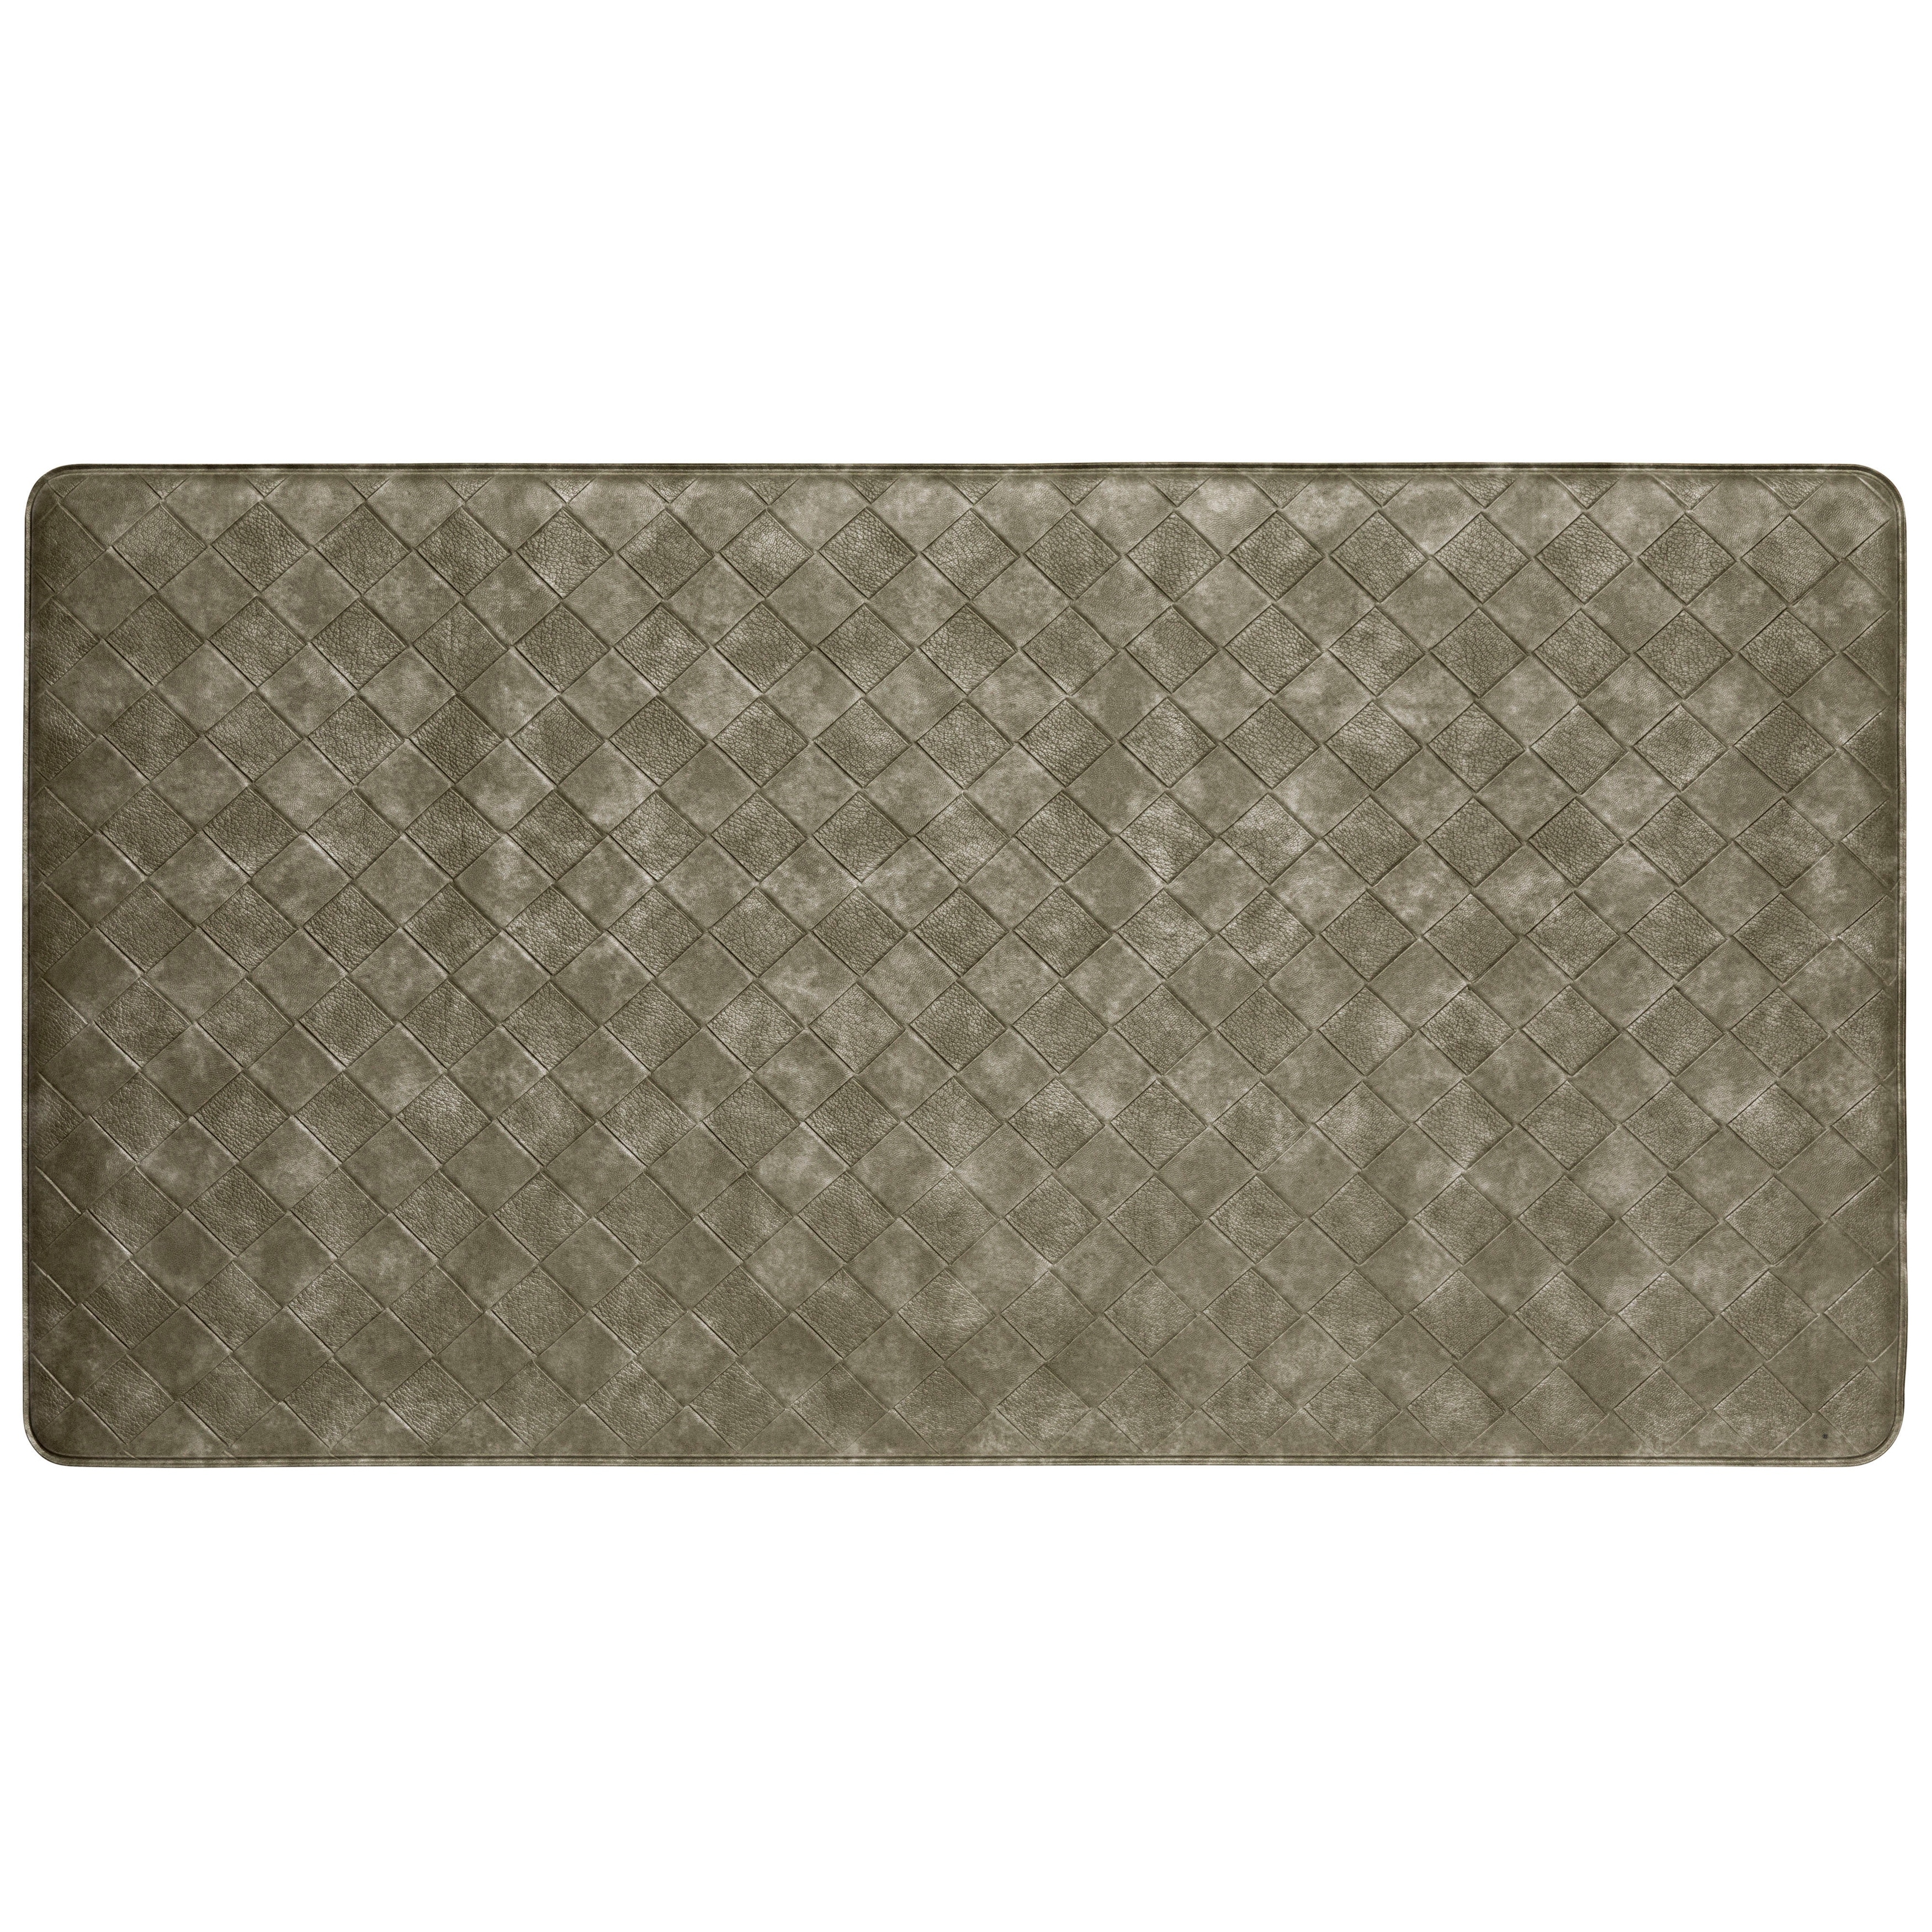 https://ak1.ostkcdn.com/images/products/is/images/direct/75fdd79e0b3f7a35bf6cd54709800f4a5d7f11ef/Home-Dynamix-Trenton-Solace-Anti-Fatigue-Kitchen-Mat.jpg